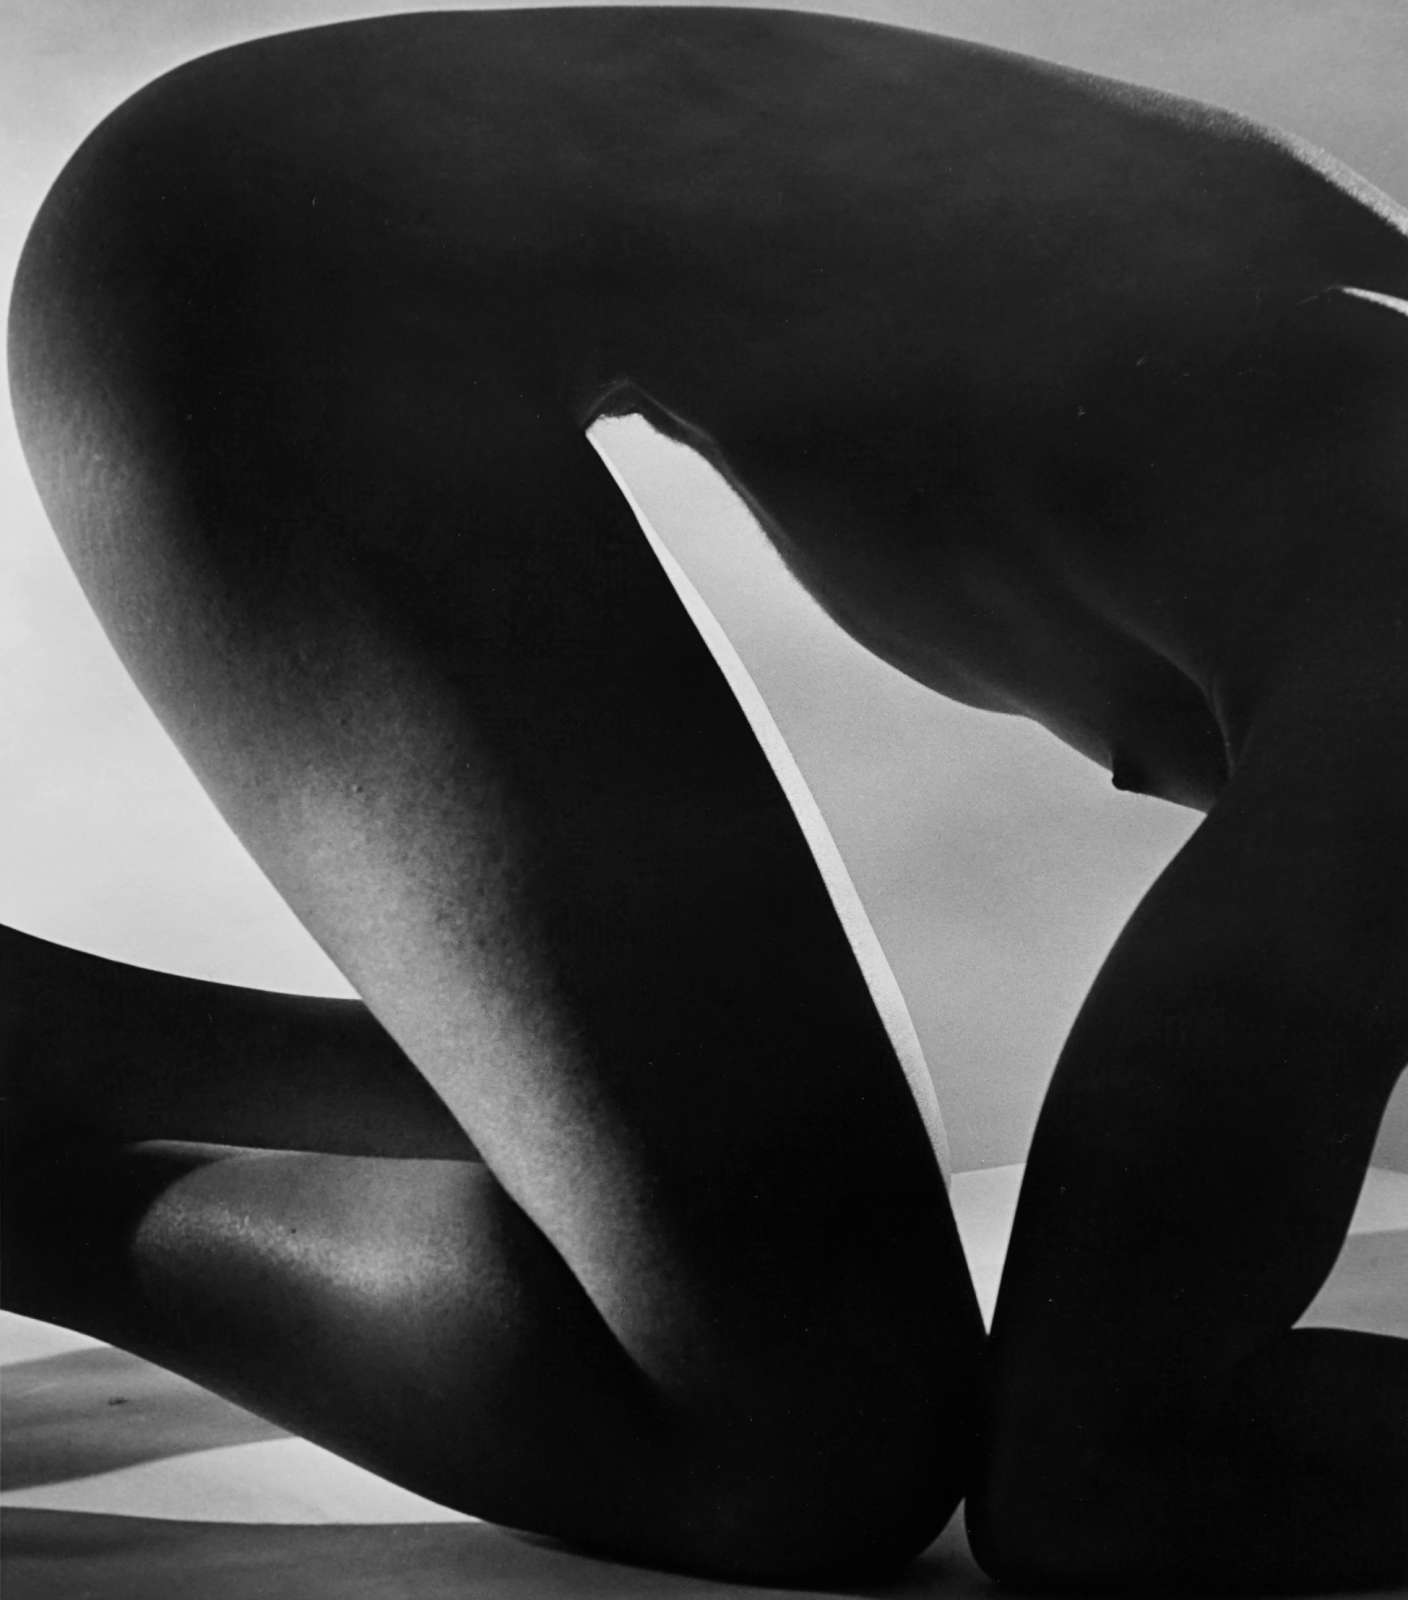 Horst P. Horst, "Triangles," Male Nude, N.Y., 1952